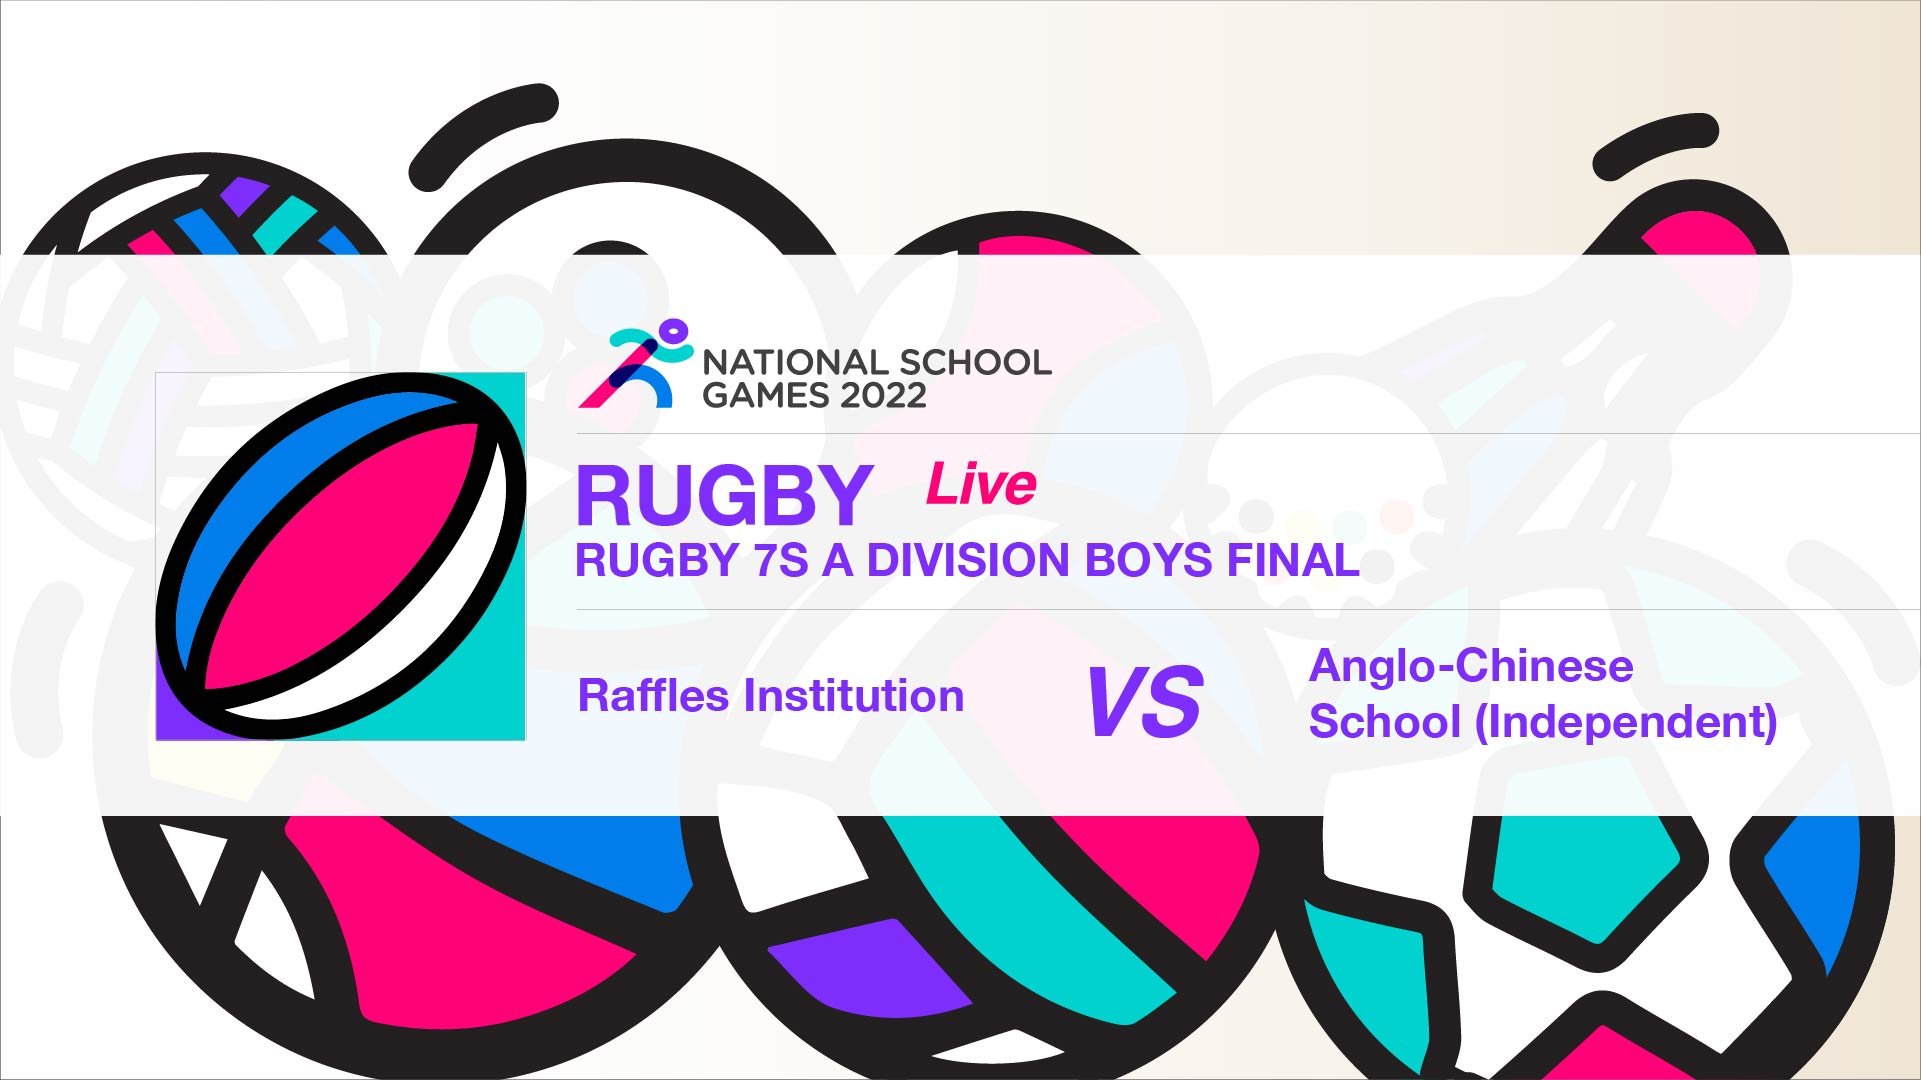 SSSC Rugby 7s A Division Boys Final | Raffles Institution vs Anglo-Chinese School (Independent)